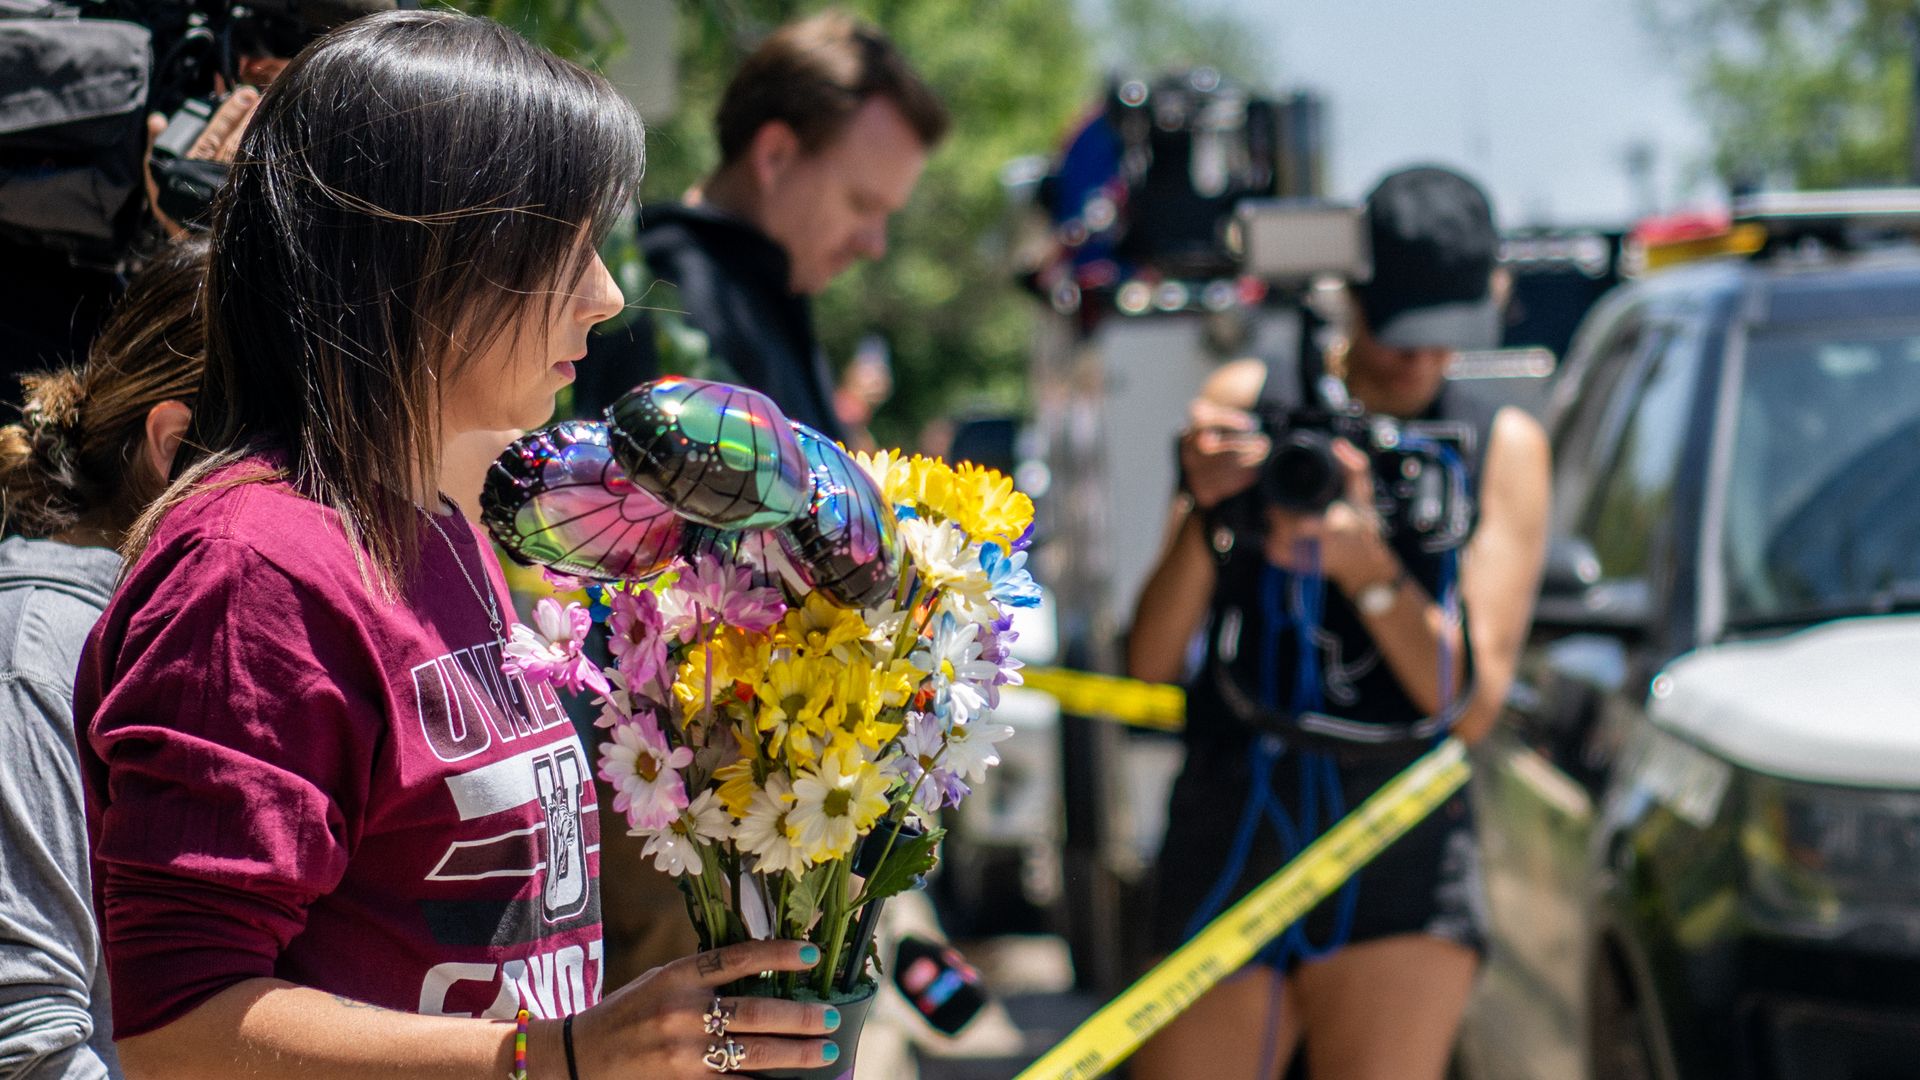 A woman is shown by the side holding a bouquet of yellow flowers and balloons at a memorial for the shooting victims in Uvalde, Texas